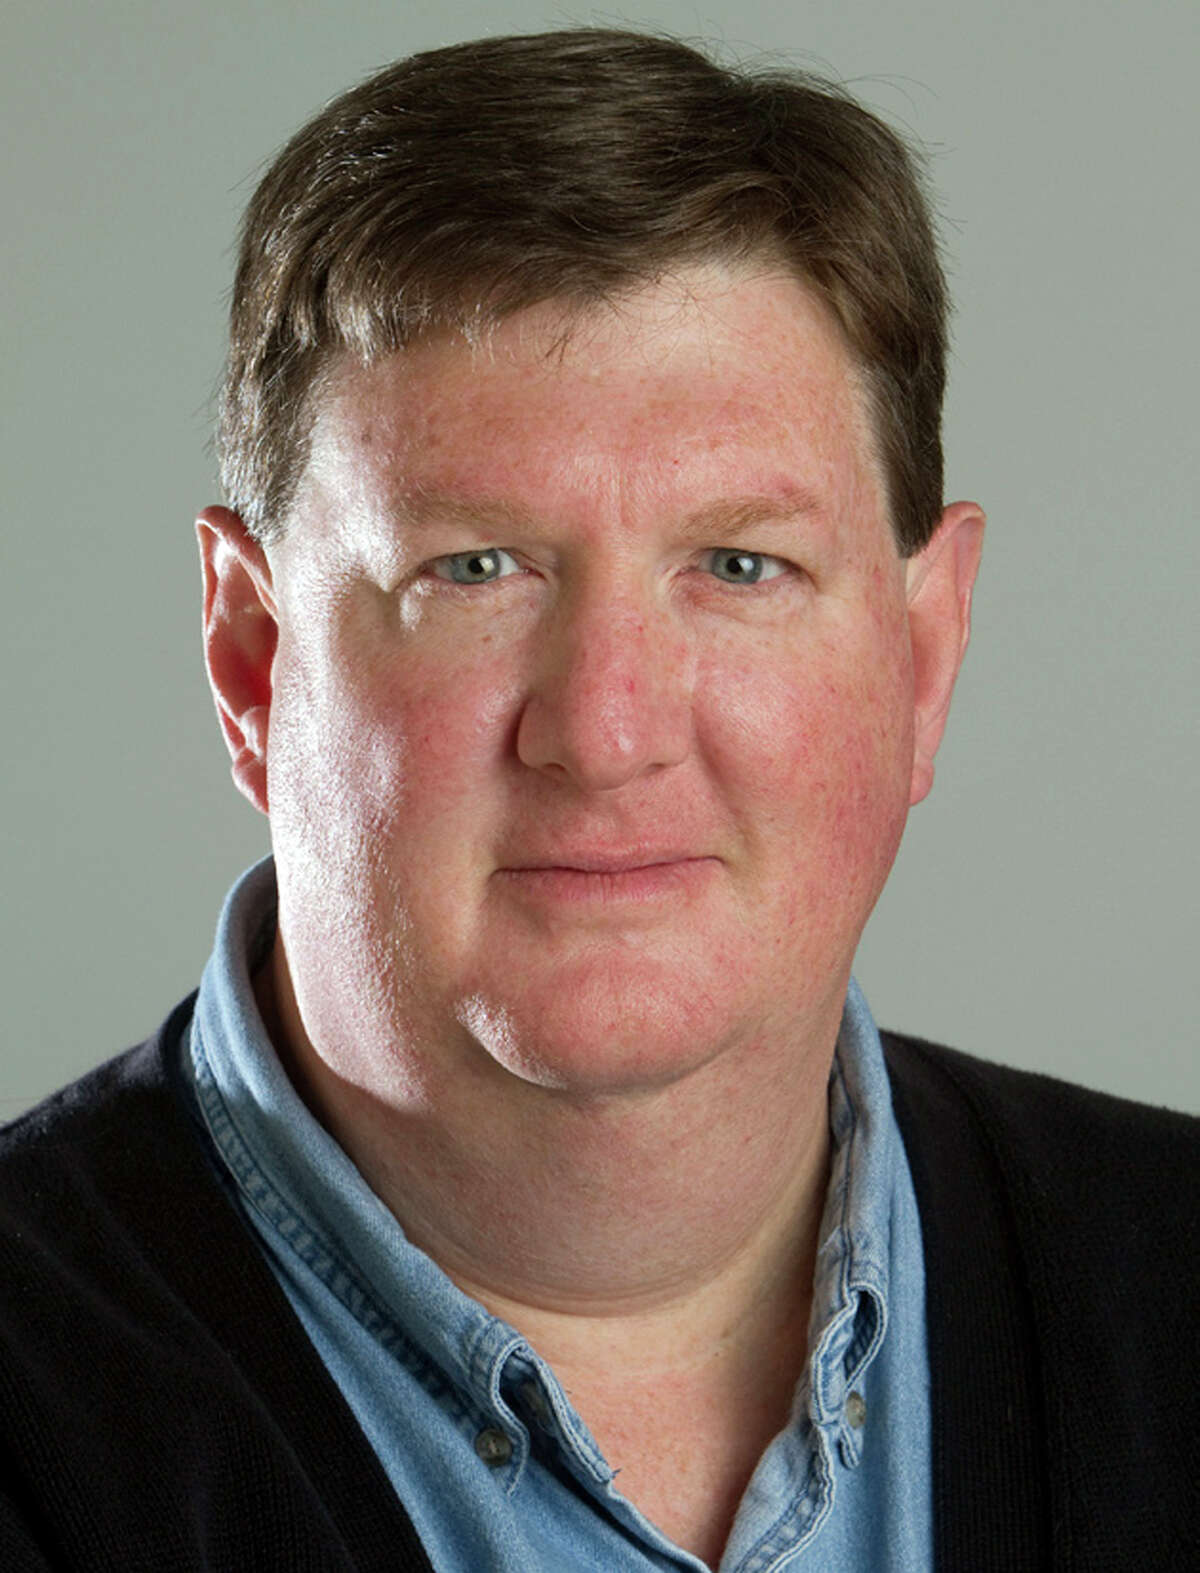 This undated photo provided by the Pulitzer Prize Board shows Michael J. Berens, of The Seattle Times, who was awarded the 2012 Pulitzer Prize for Investigative Reporting, announced in New York, Monday.